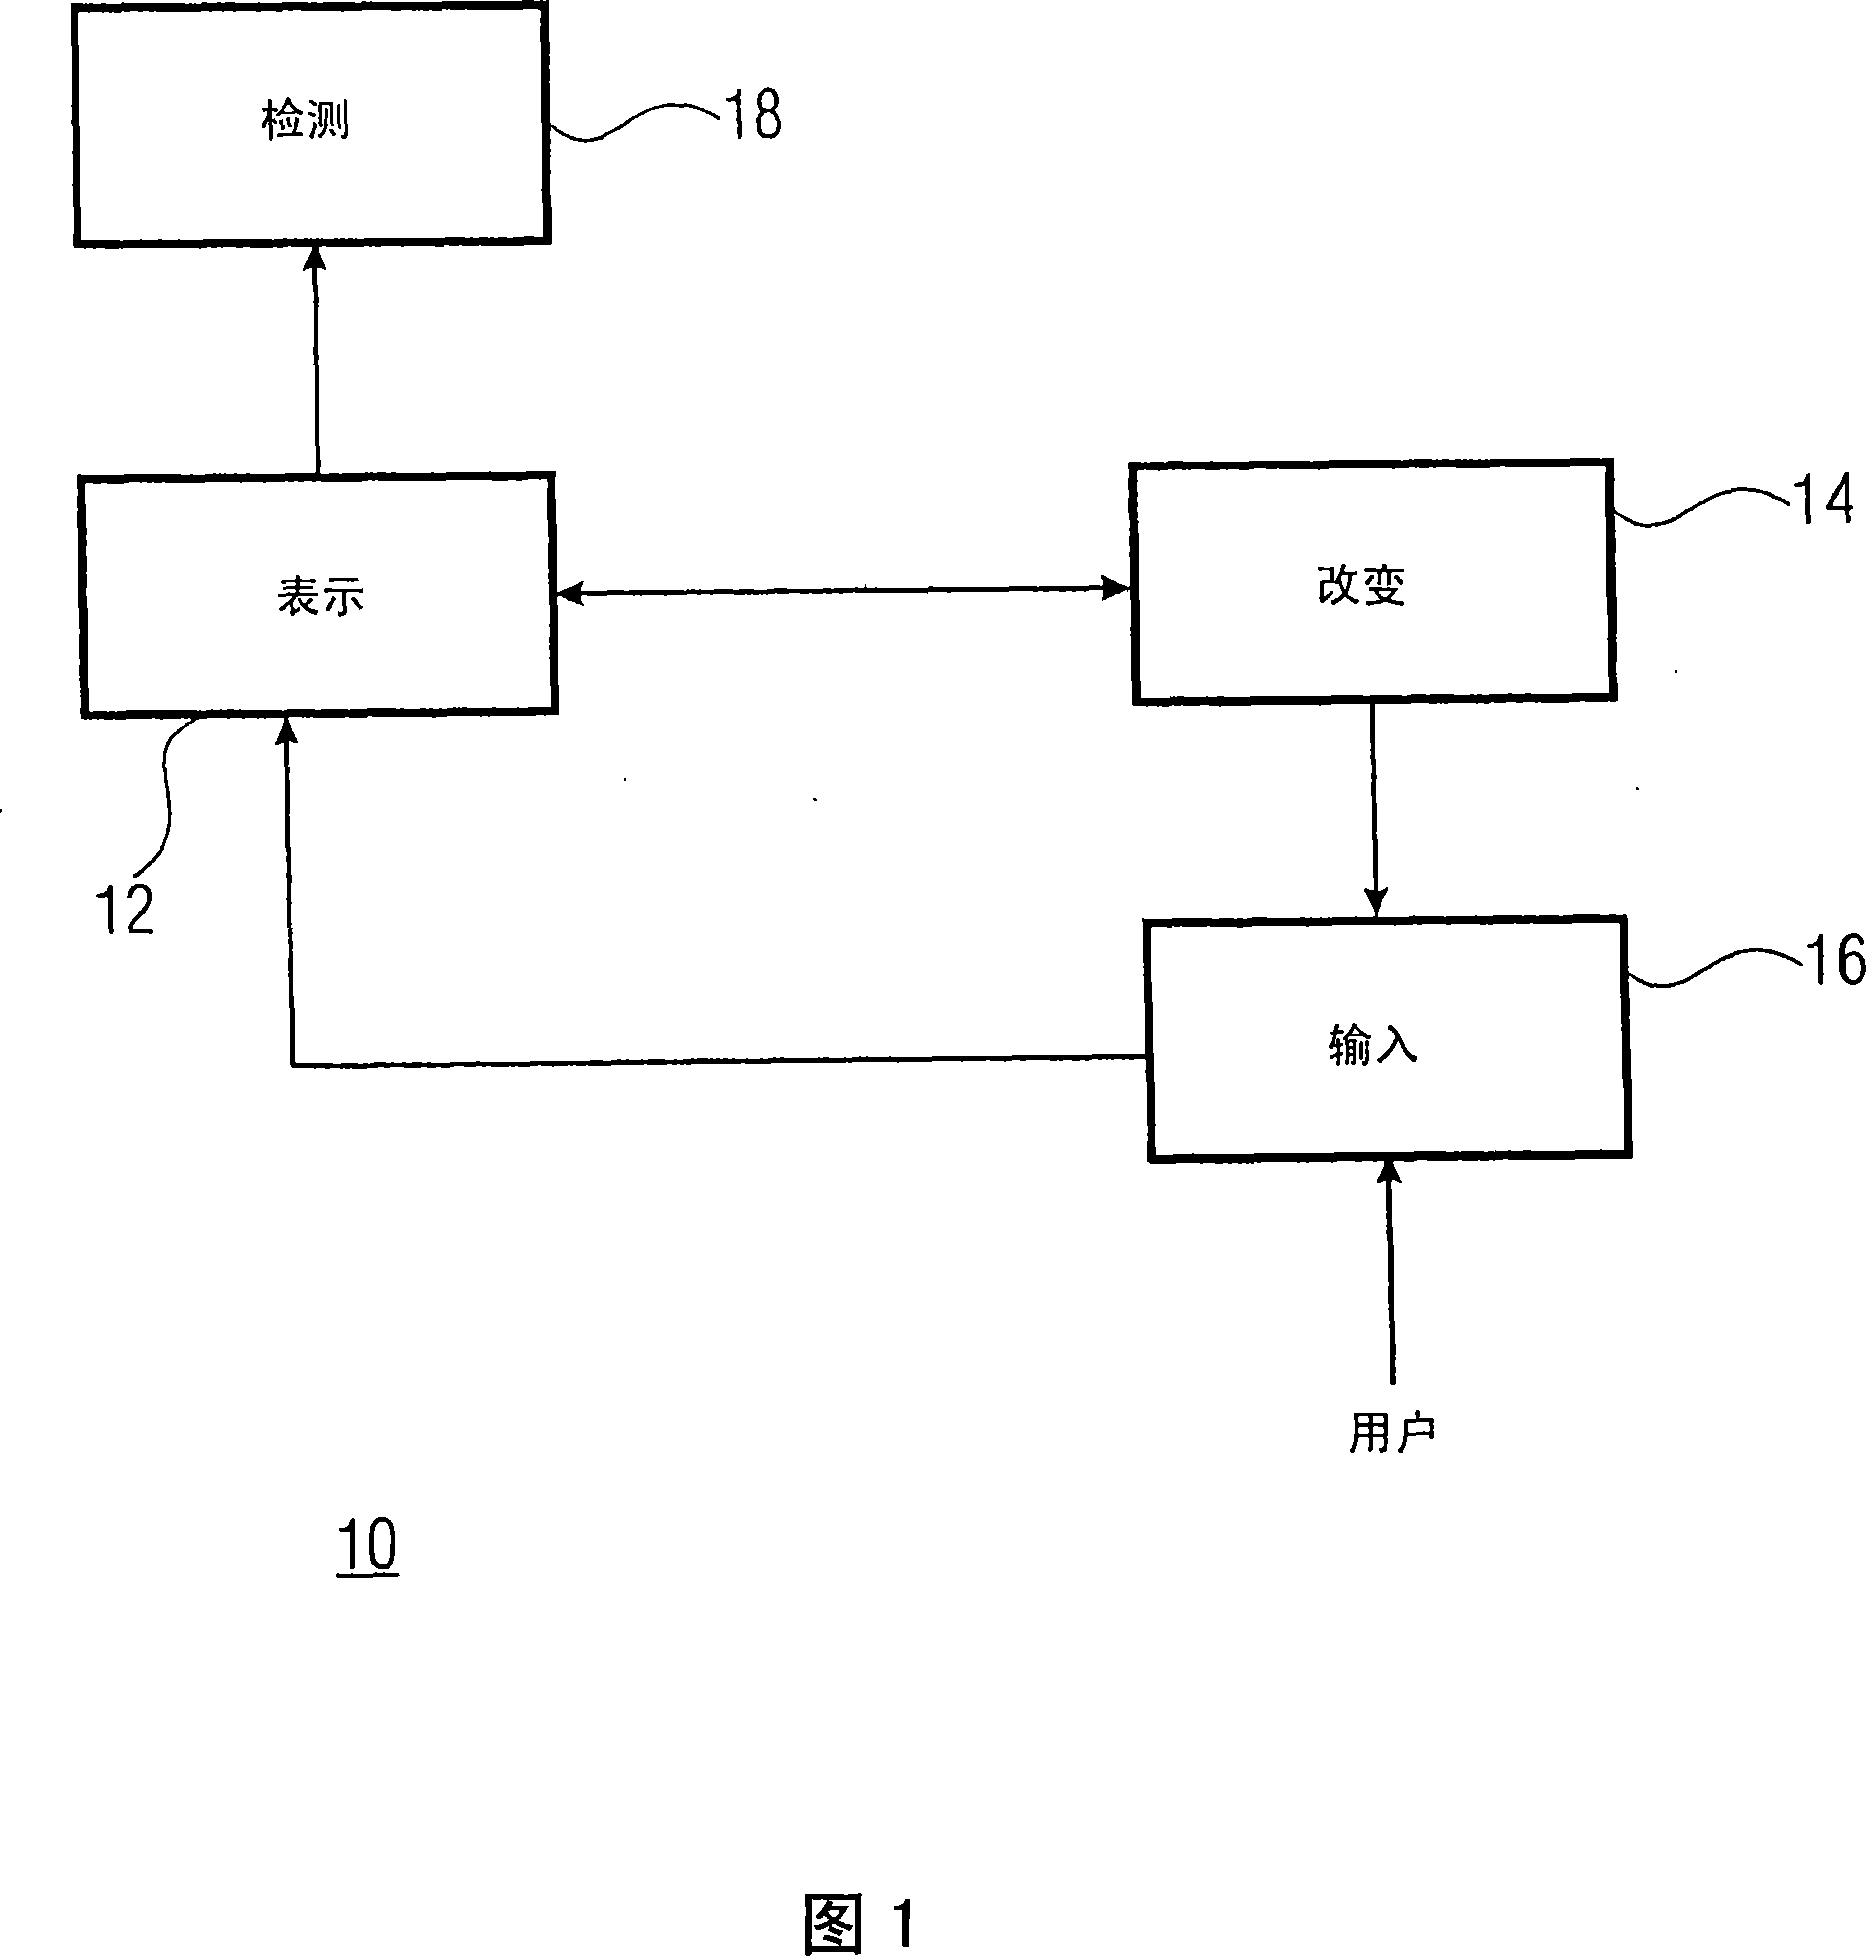 Device and method for generation and processing of sound effects in spatial audio reproduction systems using a graphical user interface